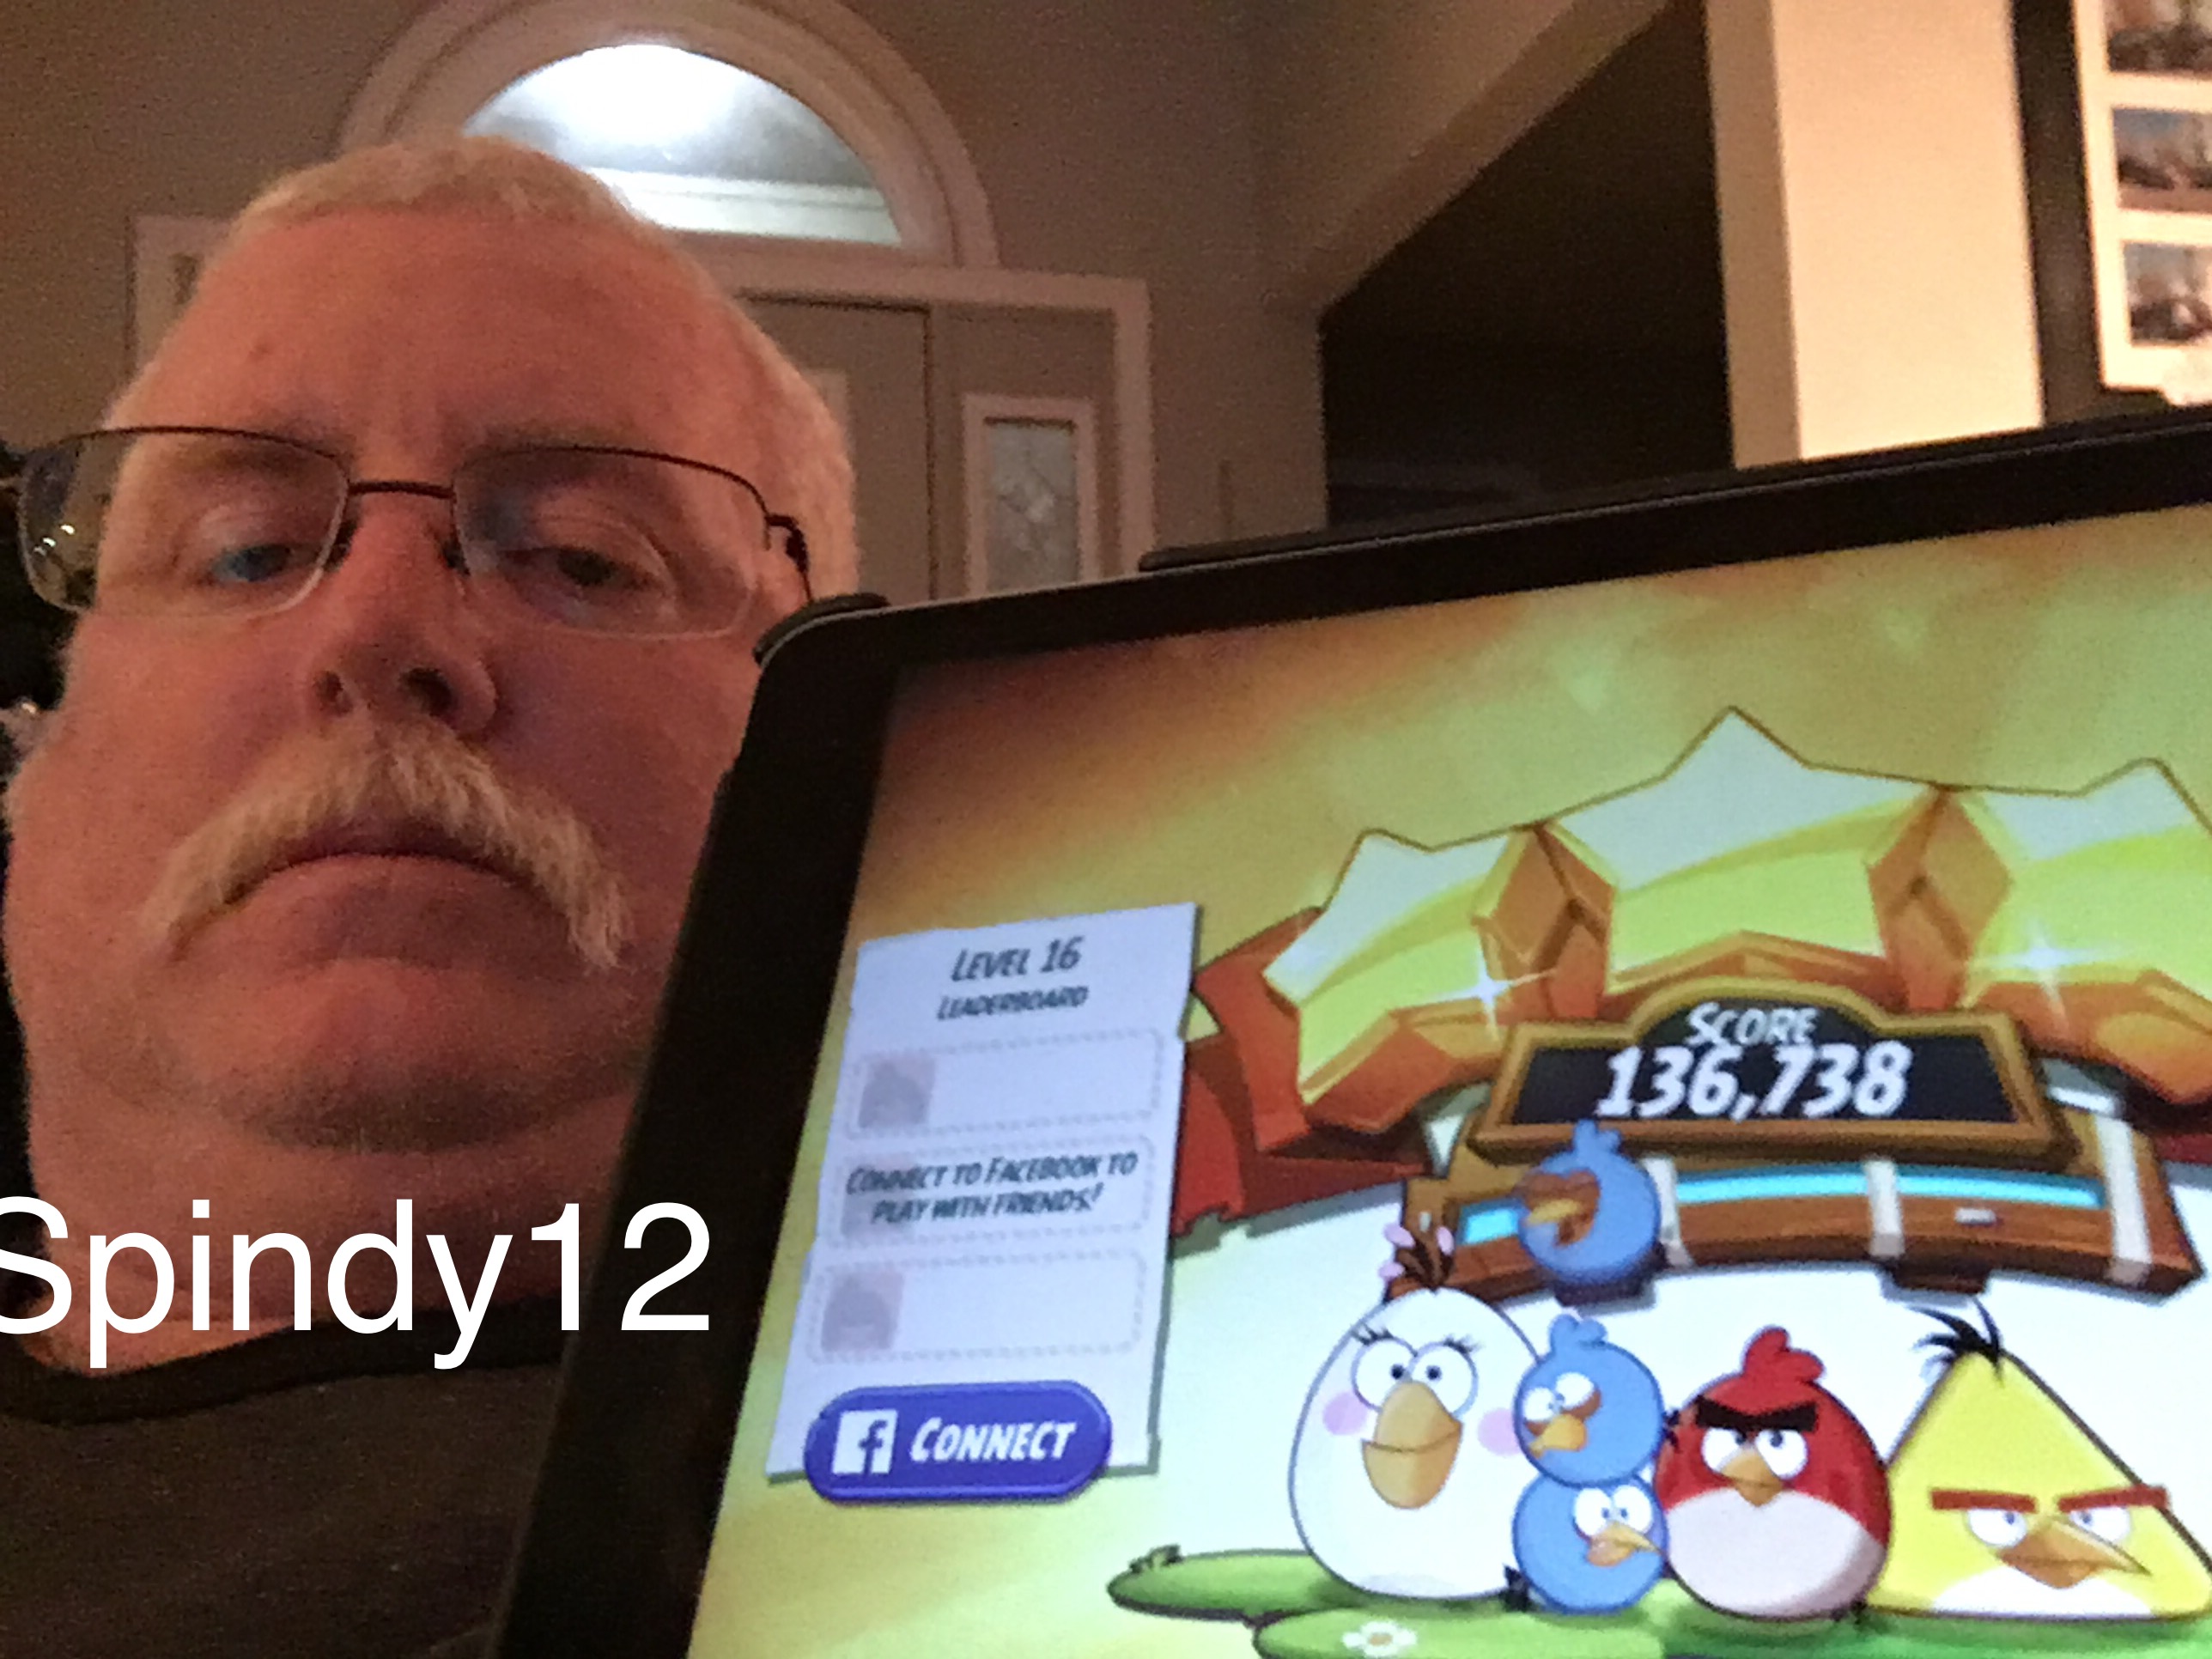 Spindy12: Angry Birds 2: Level 16 (iOS) 136,738 points on 2016-12-20 19:33:43